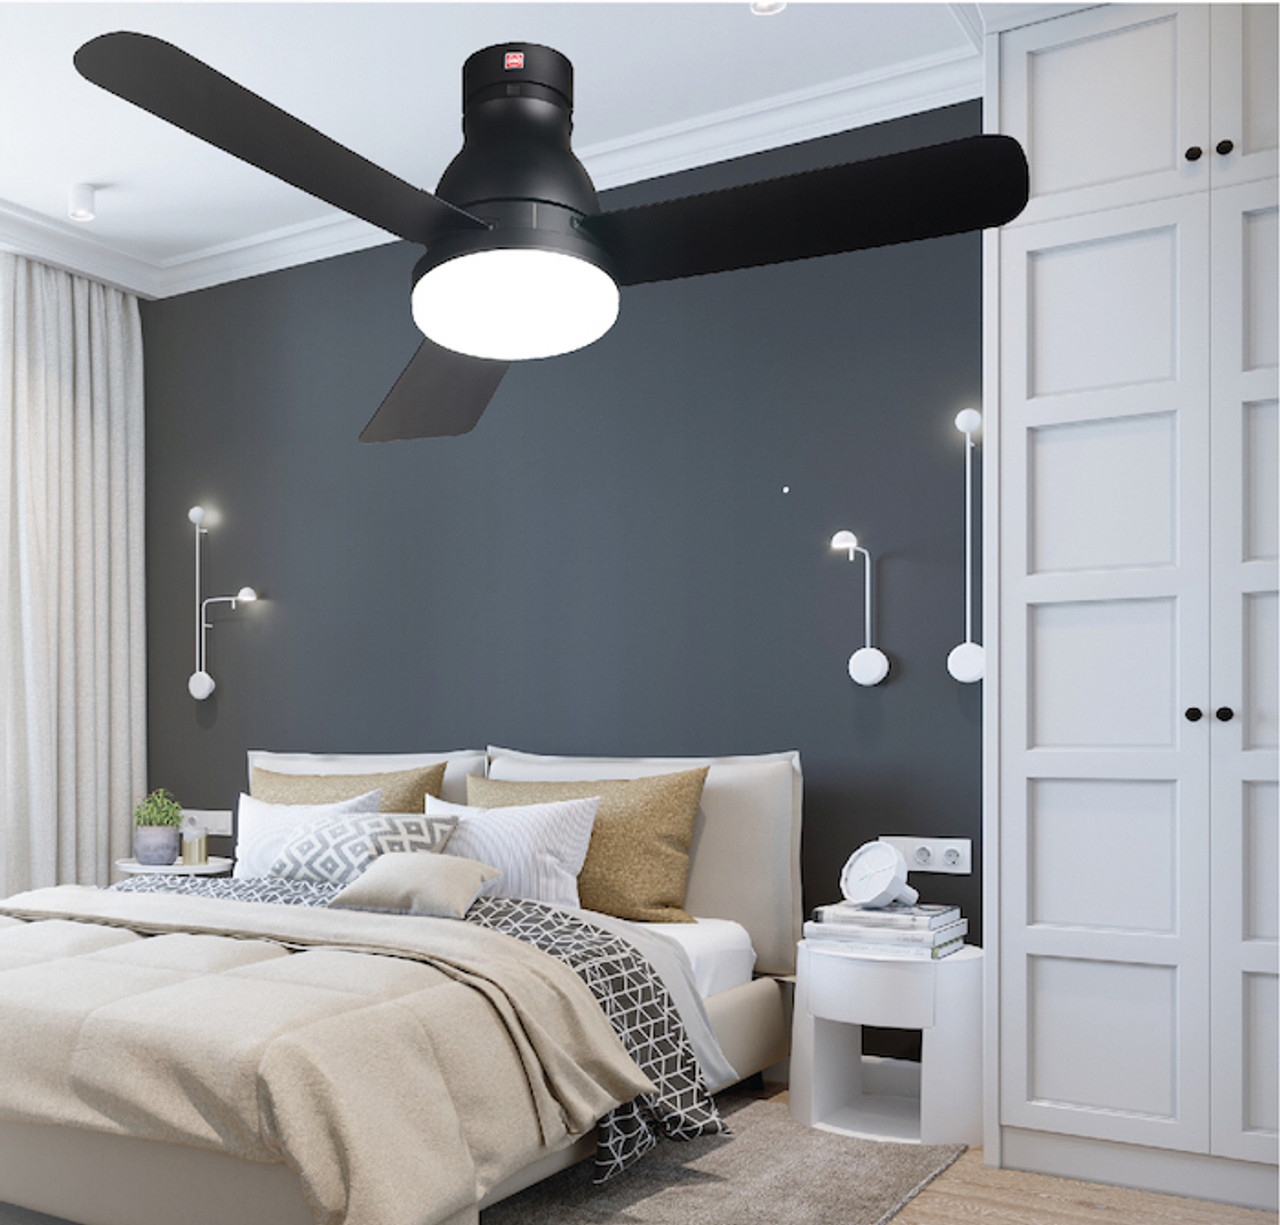 Designer Ceiling Fans in Singapore: The finishing touch to your home